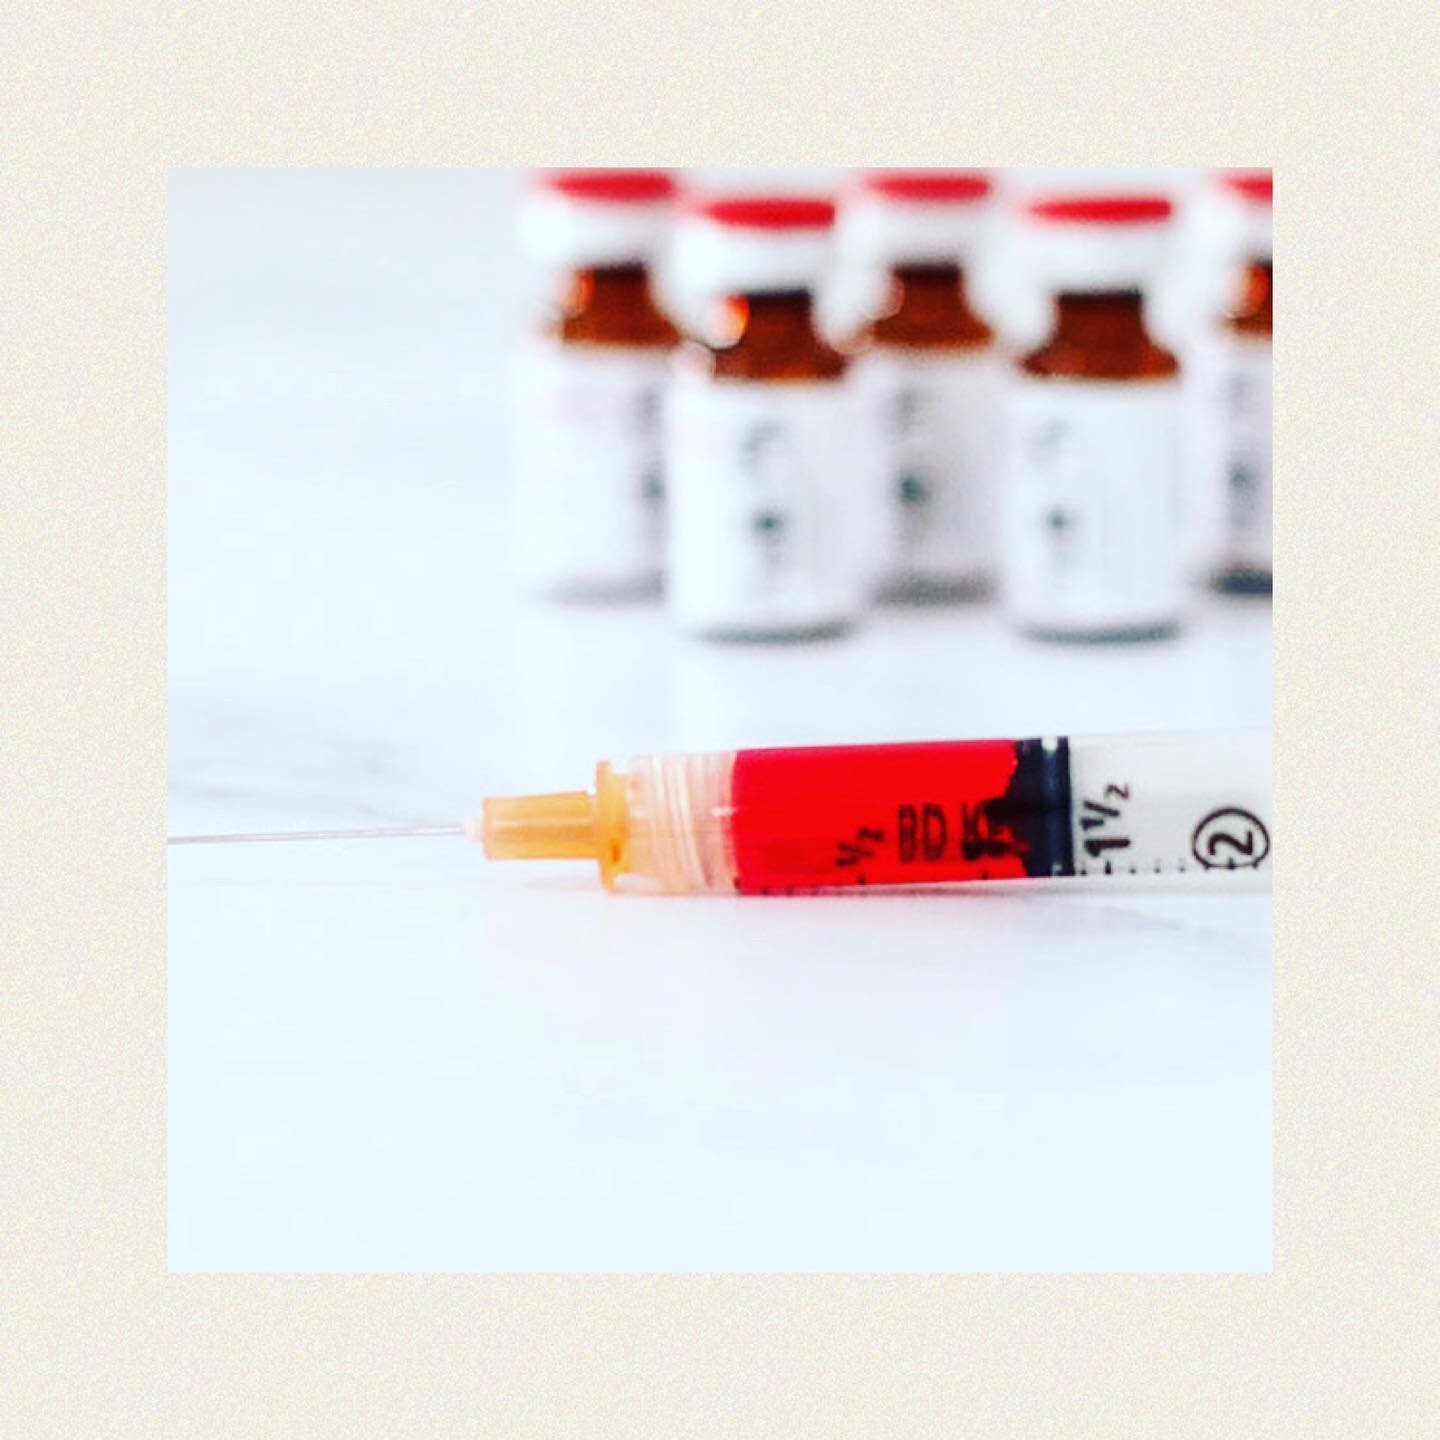 Who&rsquo;s in need of a little boost 🙋🏼&zwj;♀️
Fight fatigue, tiredness and BOOST energy levels. 
These are just some of the amazing benefits of B12 vitamin injections. 
My clients have reported feeling more alert, sleeping better, feeling more pr